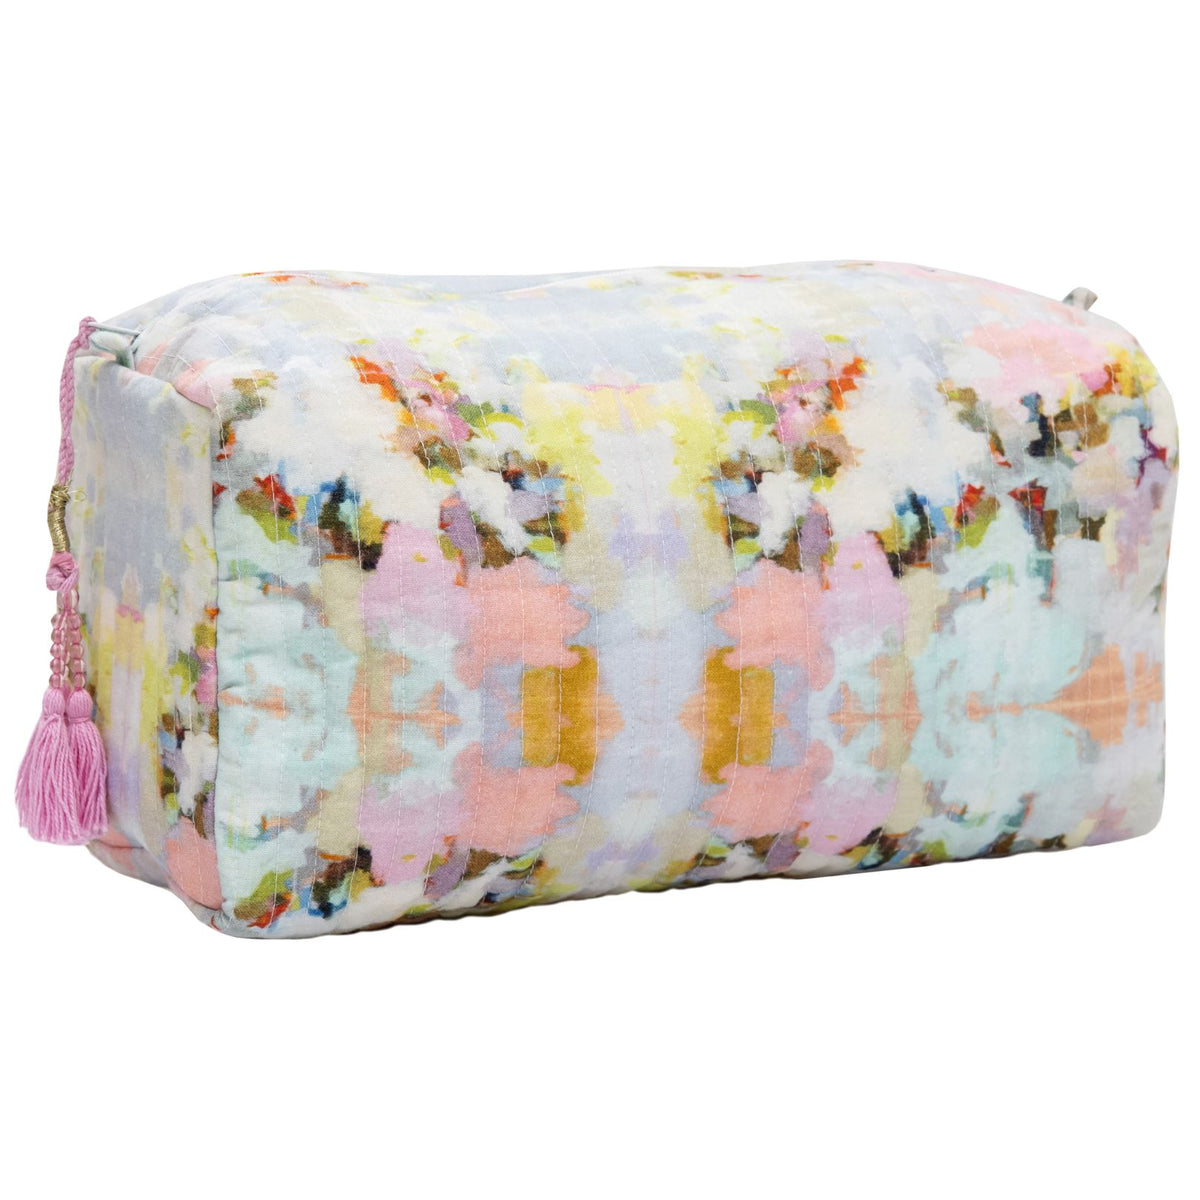 Saks Fifth Avenue Large Cosmetic Bag on SALE